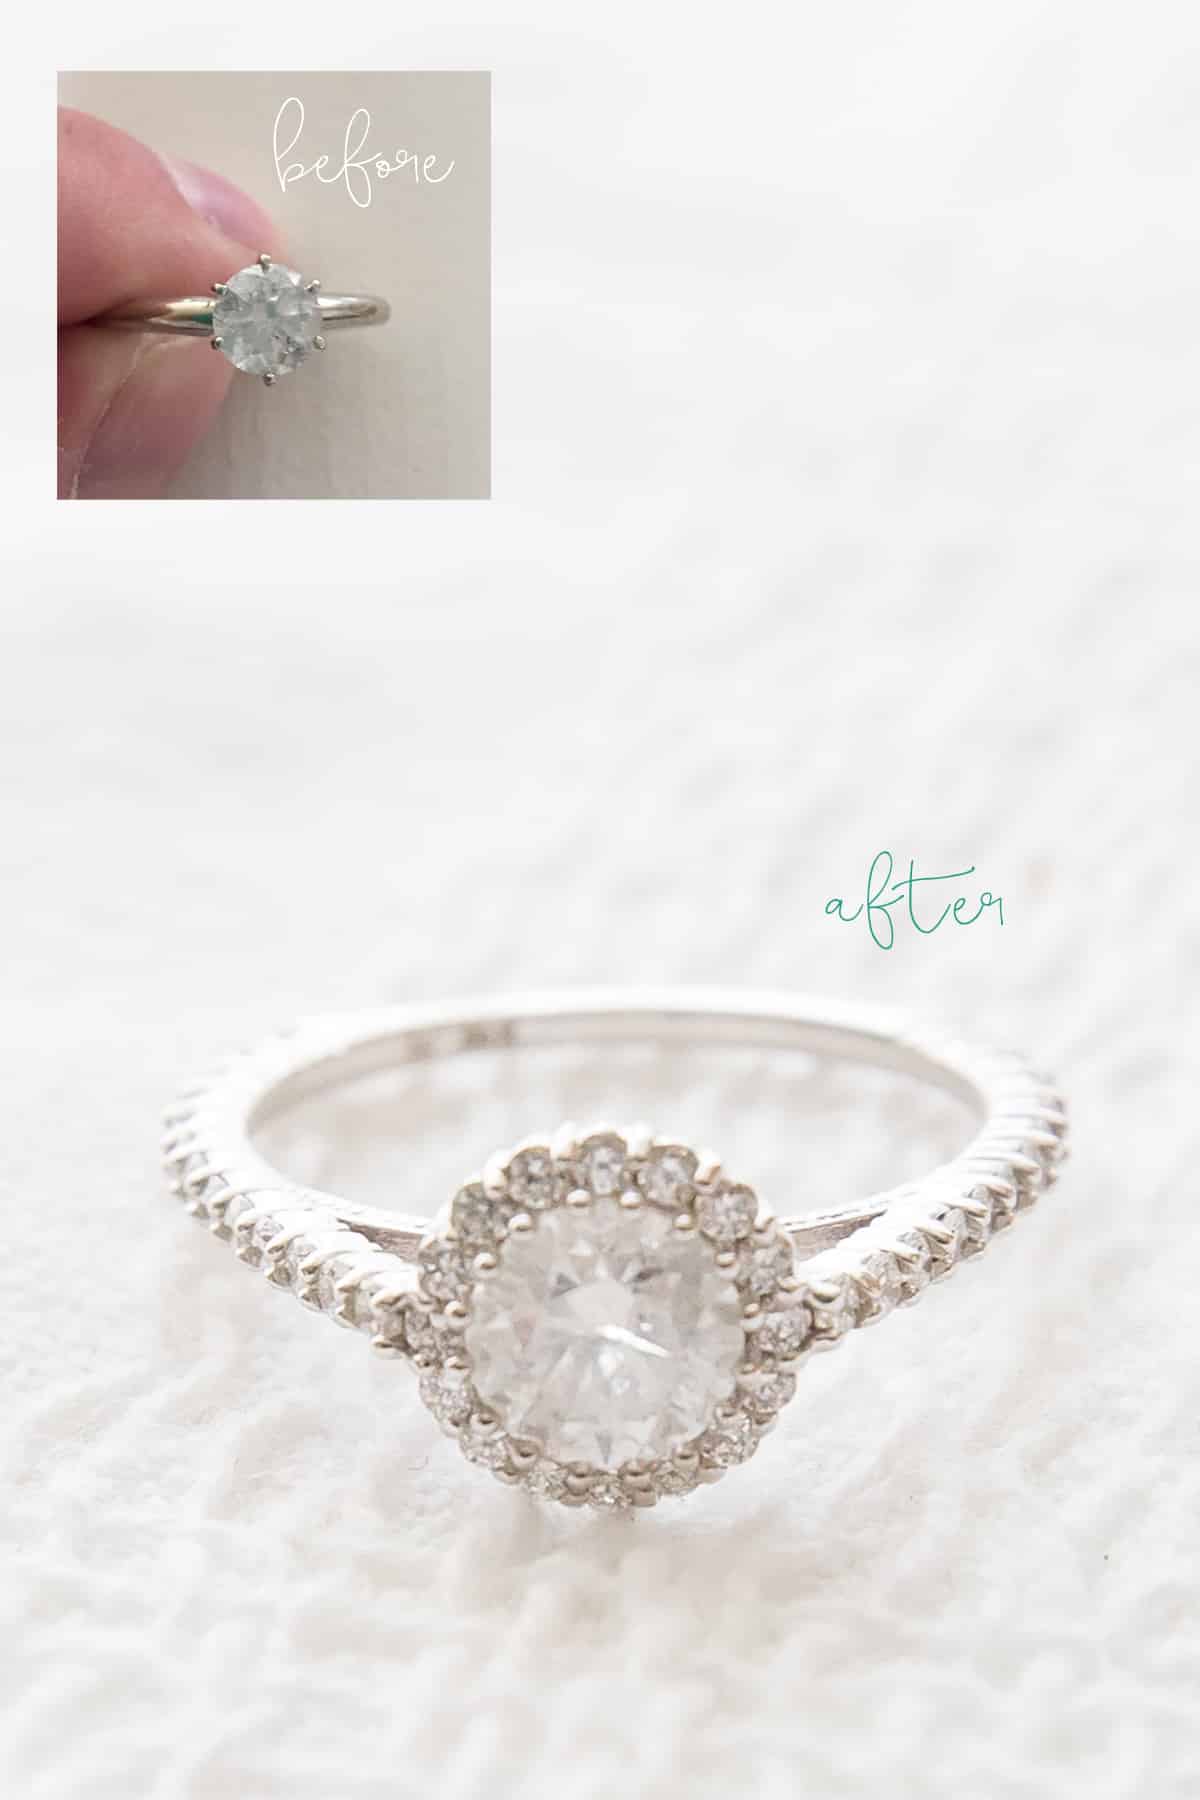 Love this idea to reset your ring- this is gorgeous!